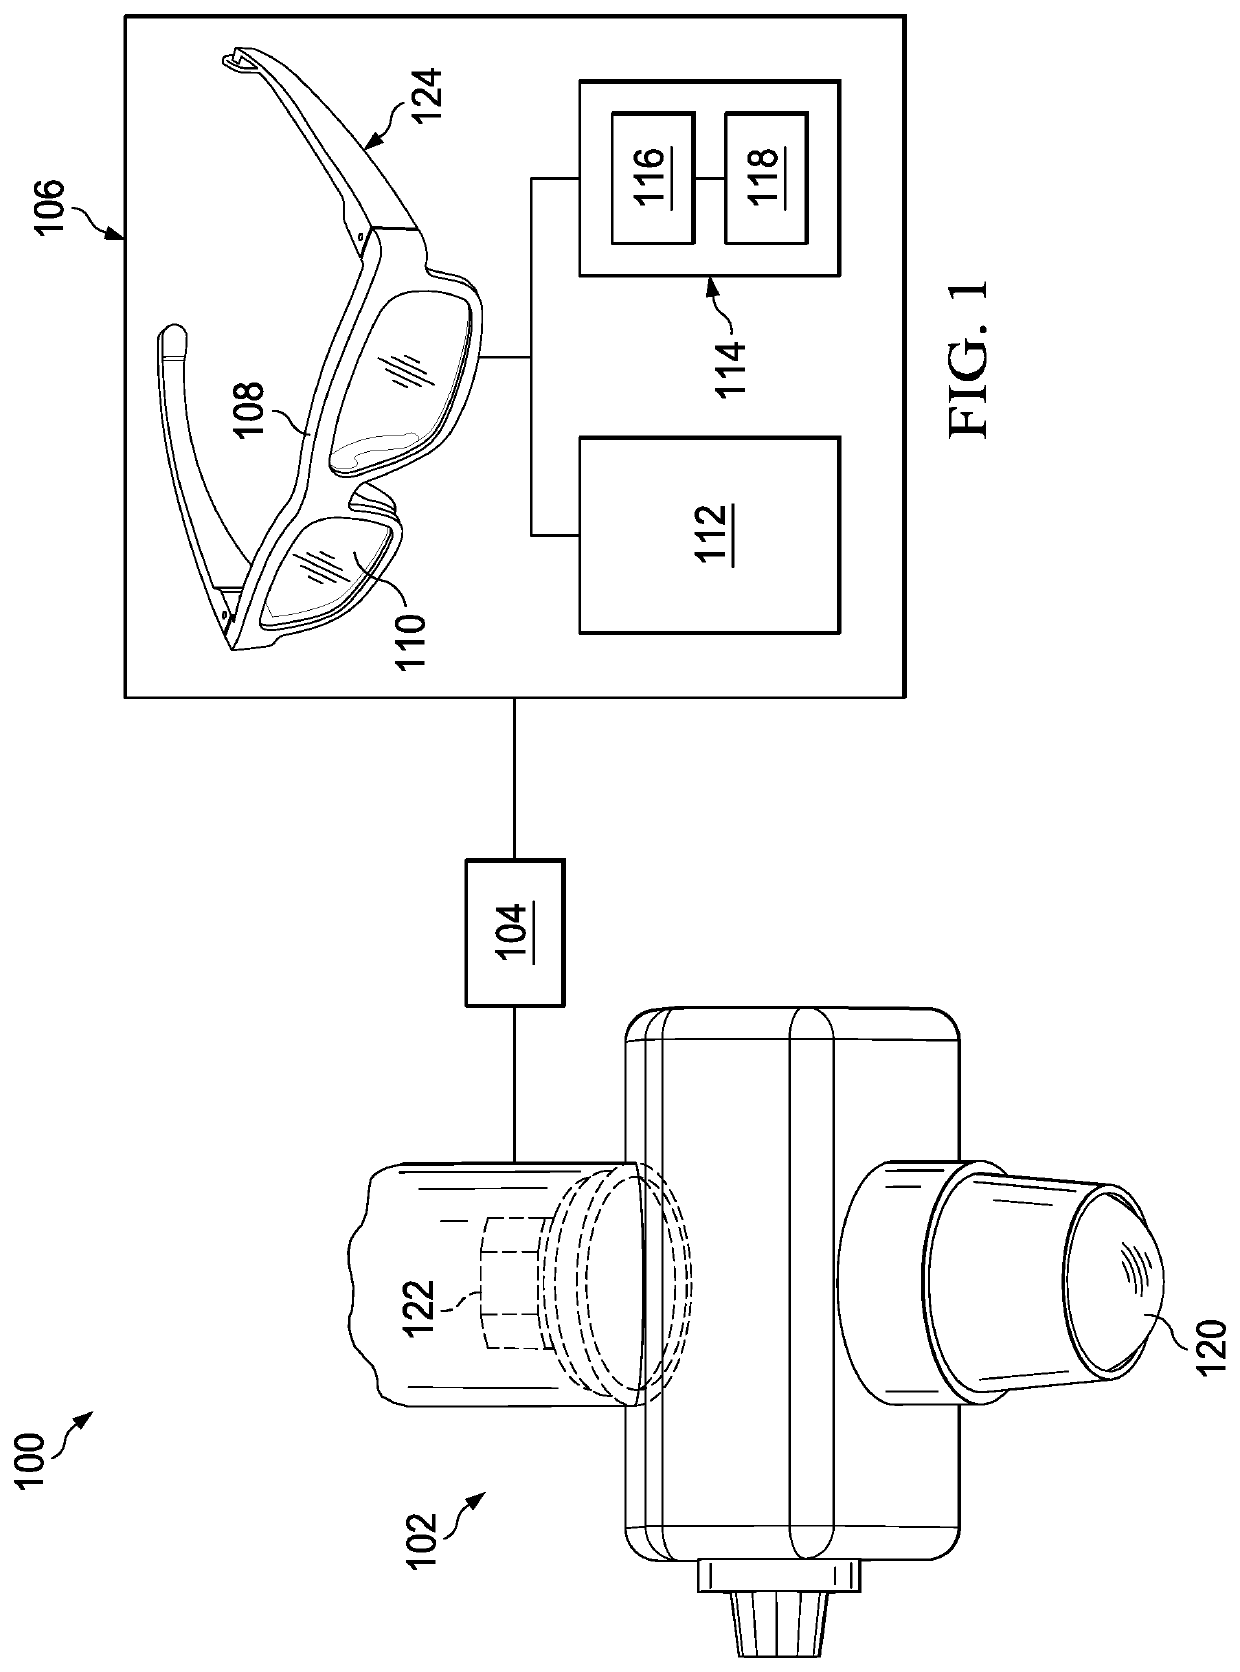 Systems and method for augmented reality ophthalmic surgical microscope projection